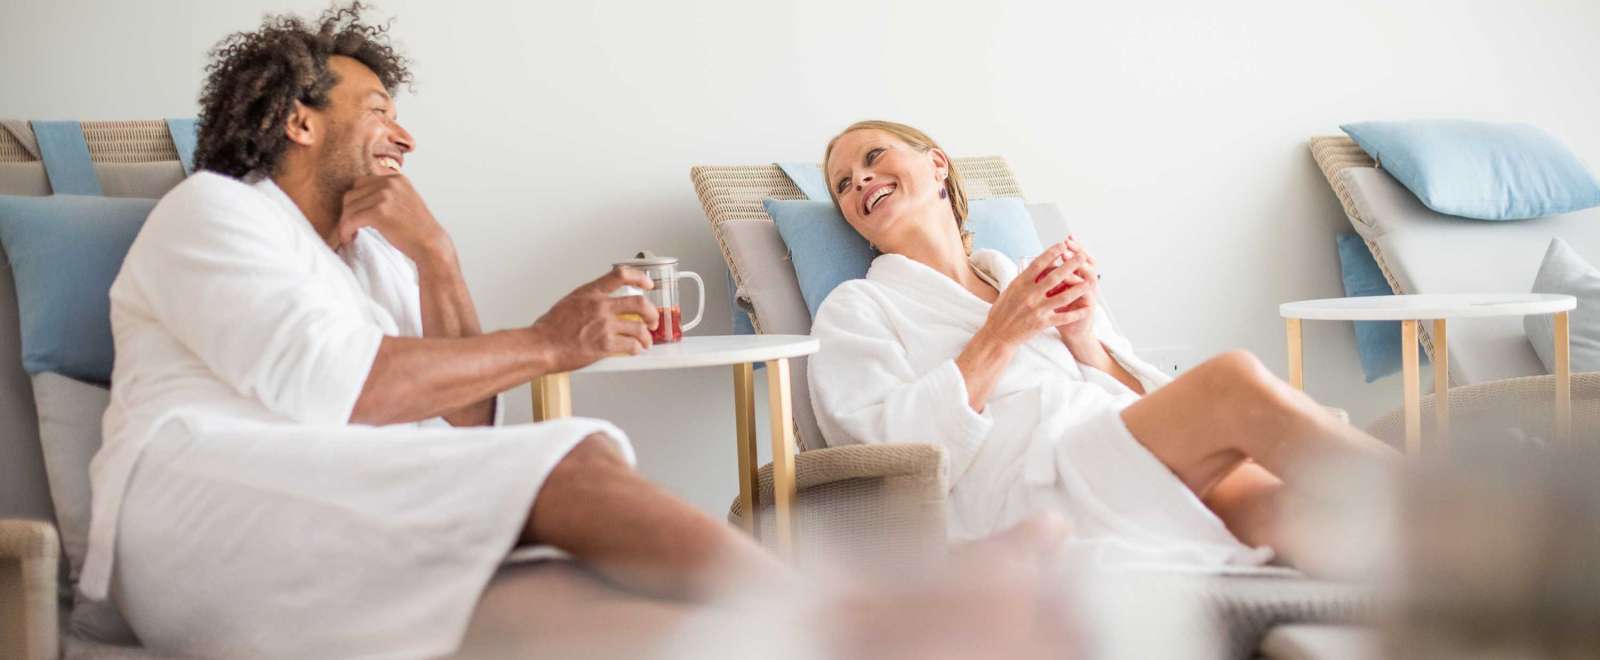 Couple in relaxation room